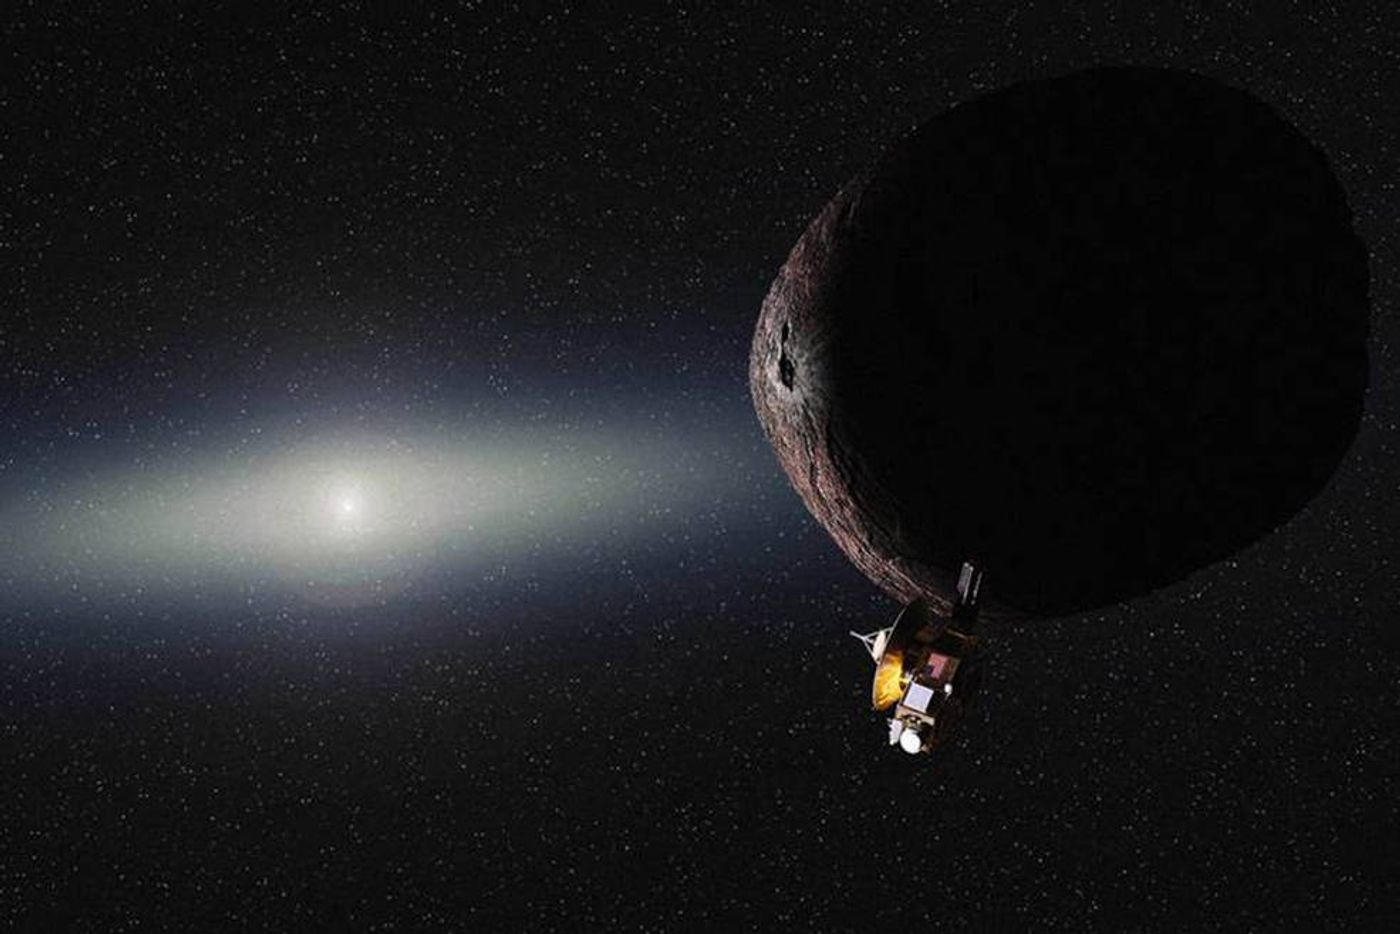 An artist's impression of the New Horizons spacecraft flying past 2014 MU69.